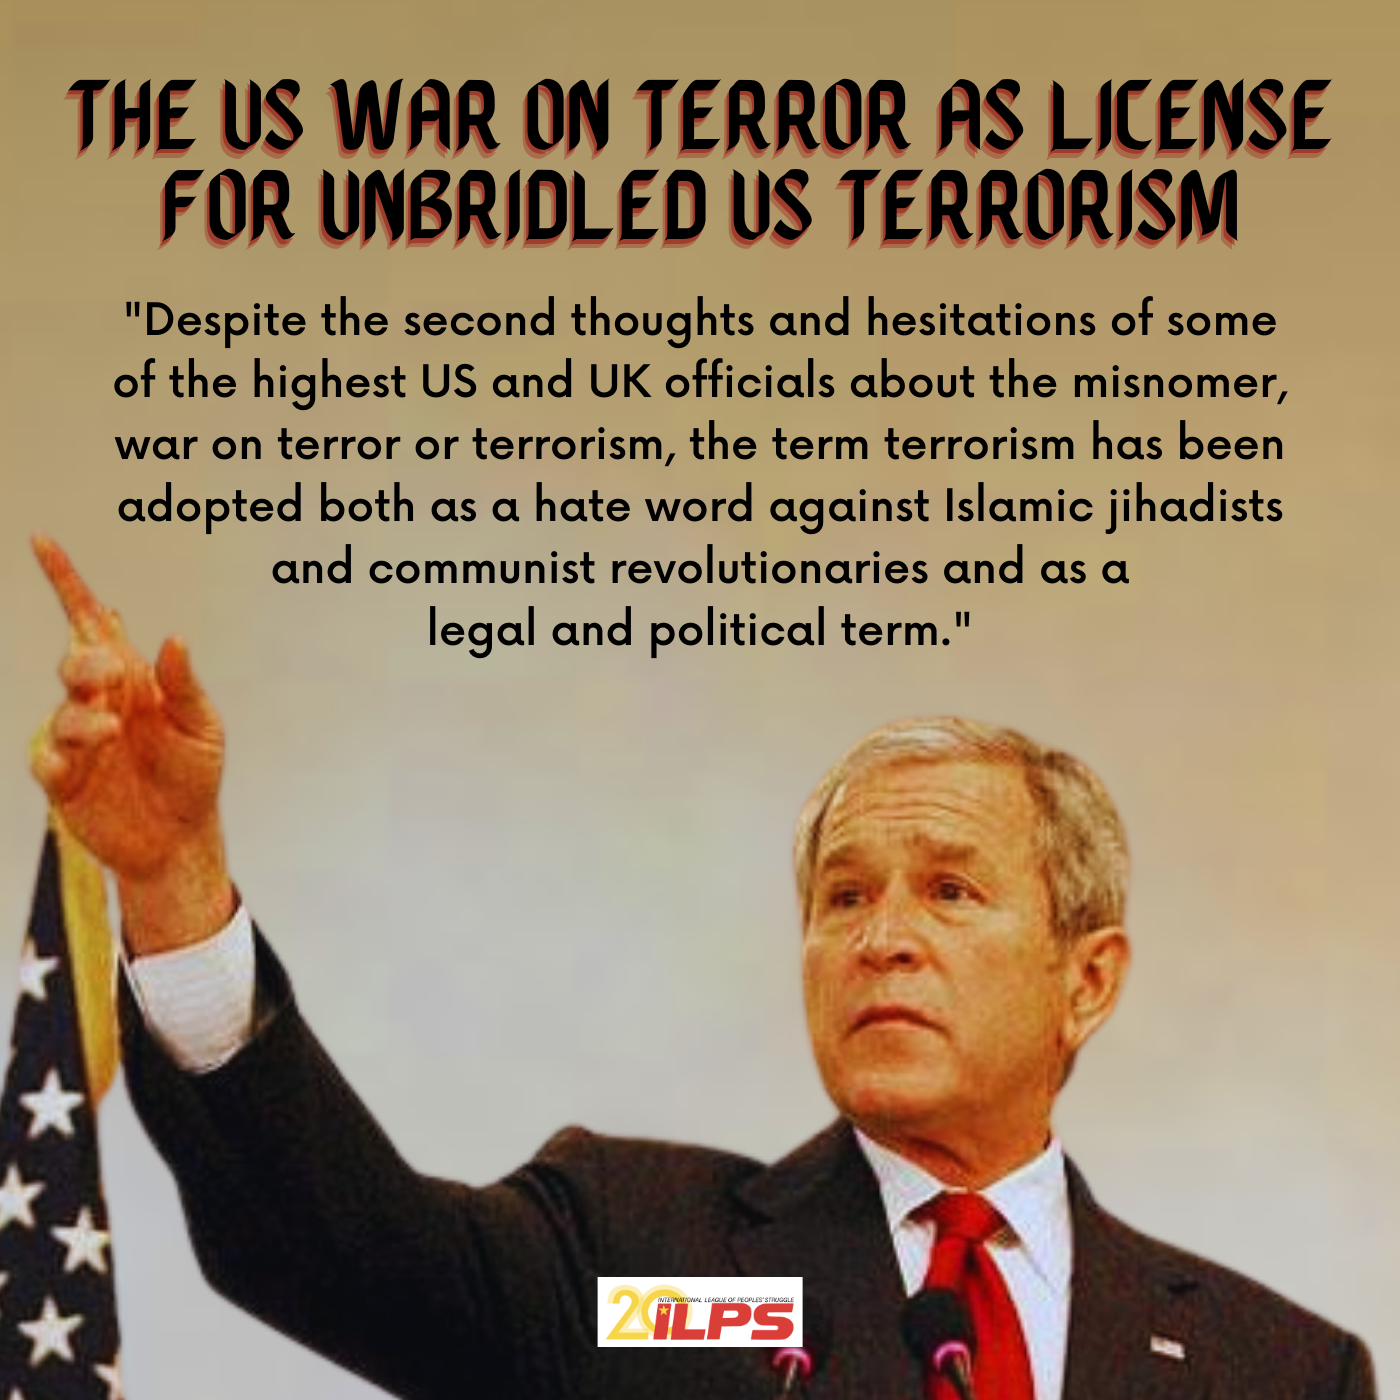 THE US WAR ON TERROR AS LICENSE FOR UNBRIDLED US TERRORISM